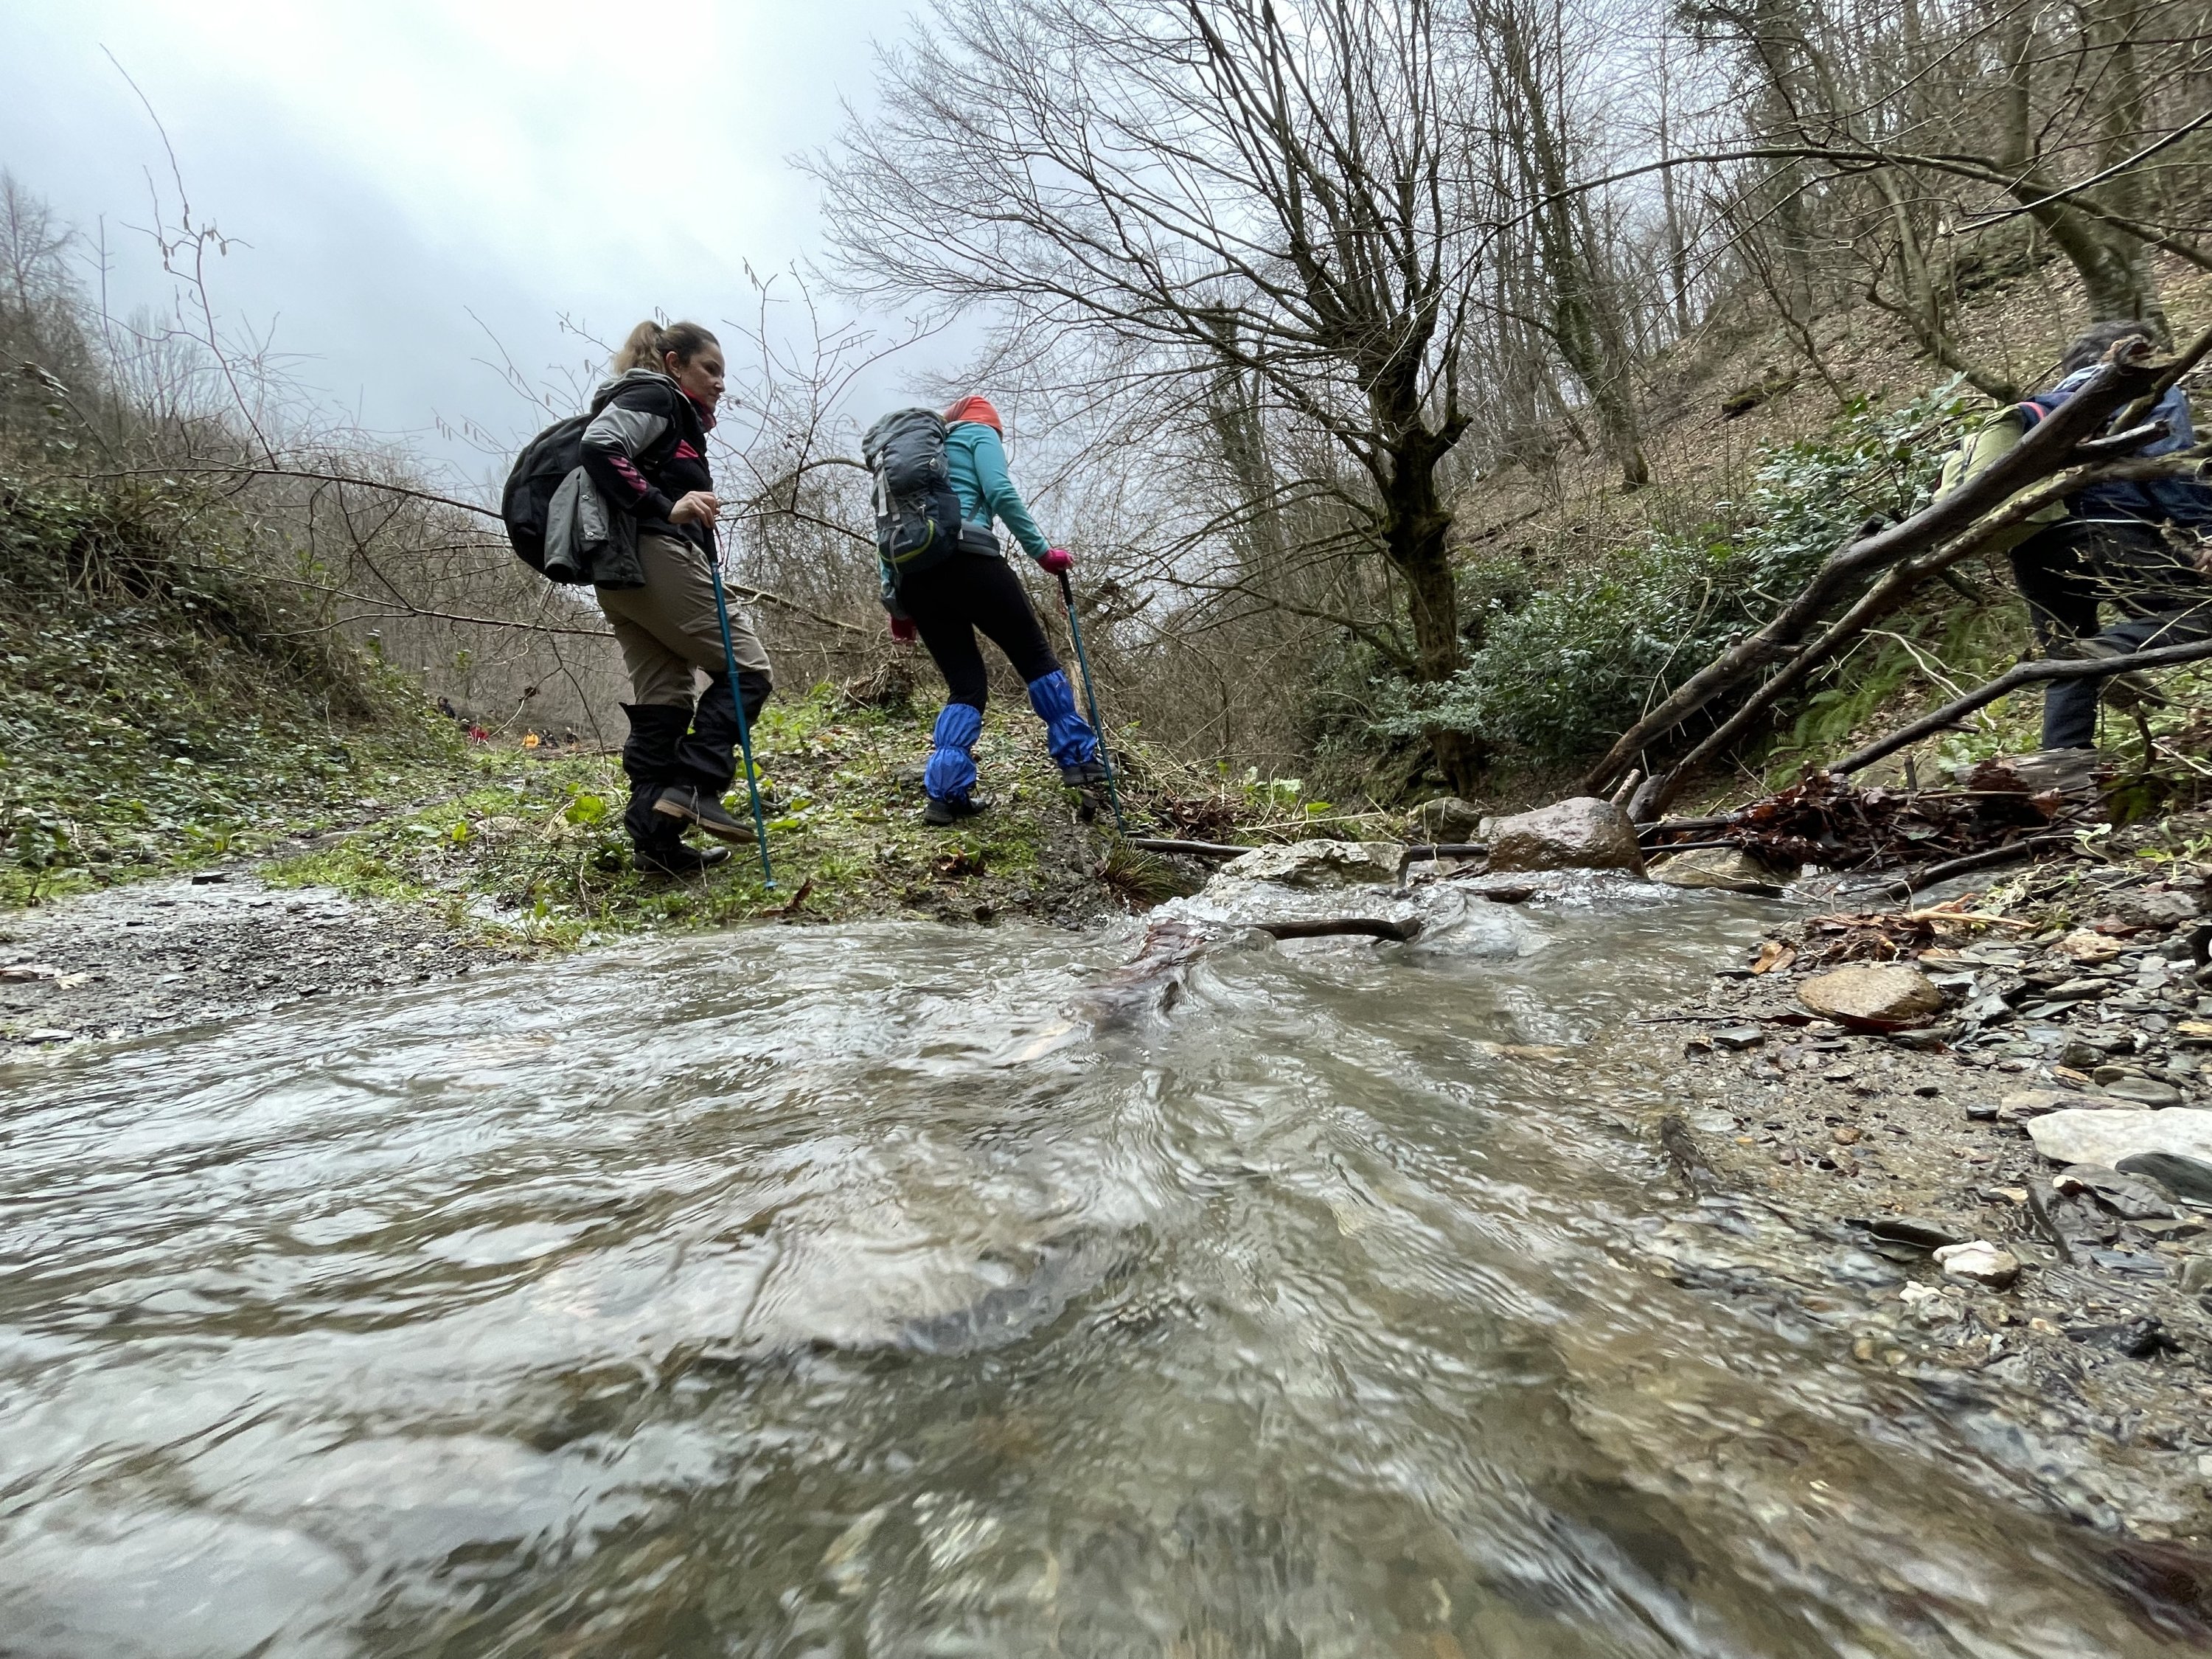 Trekkers crossing a stream along the 16-kilometer Kurtköy-Güneyköy part of the 801-kilometer "Sufi Trail" that stretches from Istanbul to Konya in central Turkey and takes 40 days to complete, Feb. 13, 2022. (AA Photo)